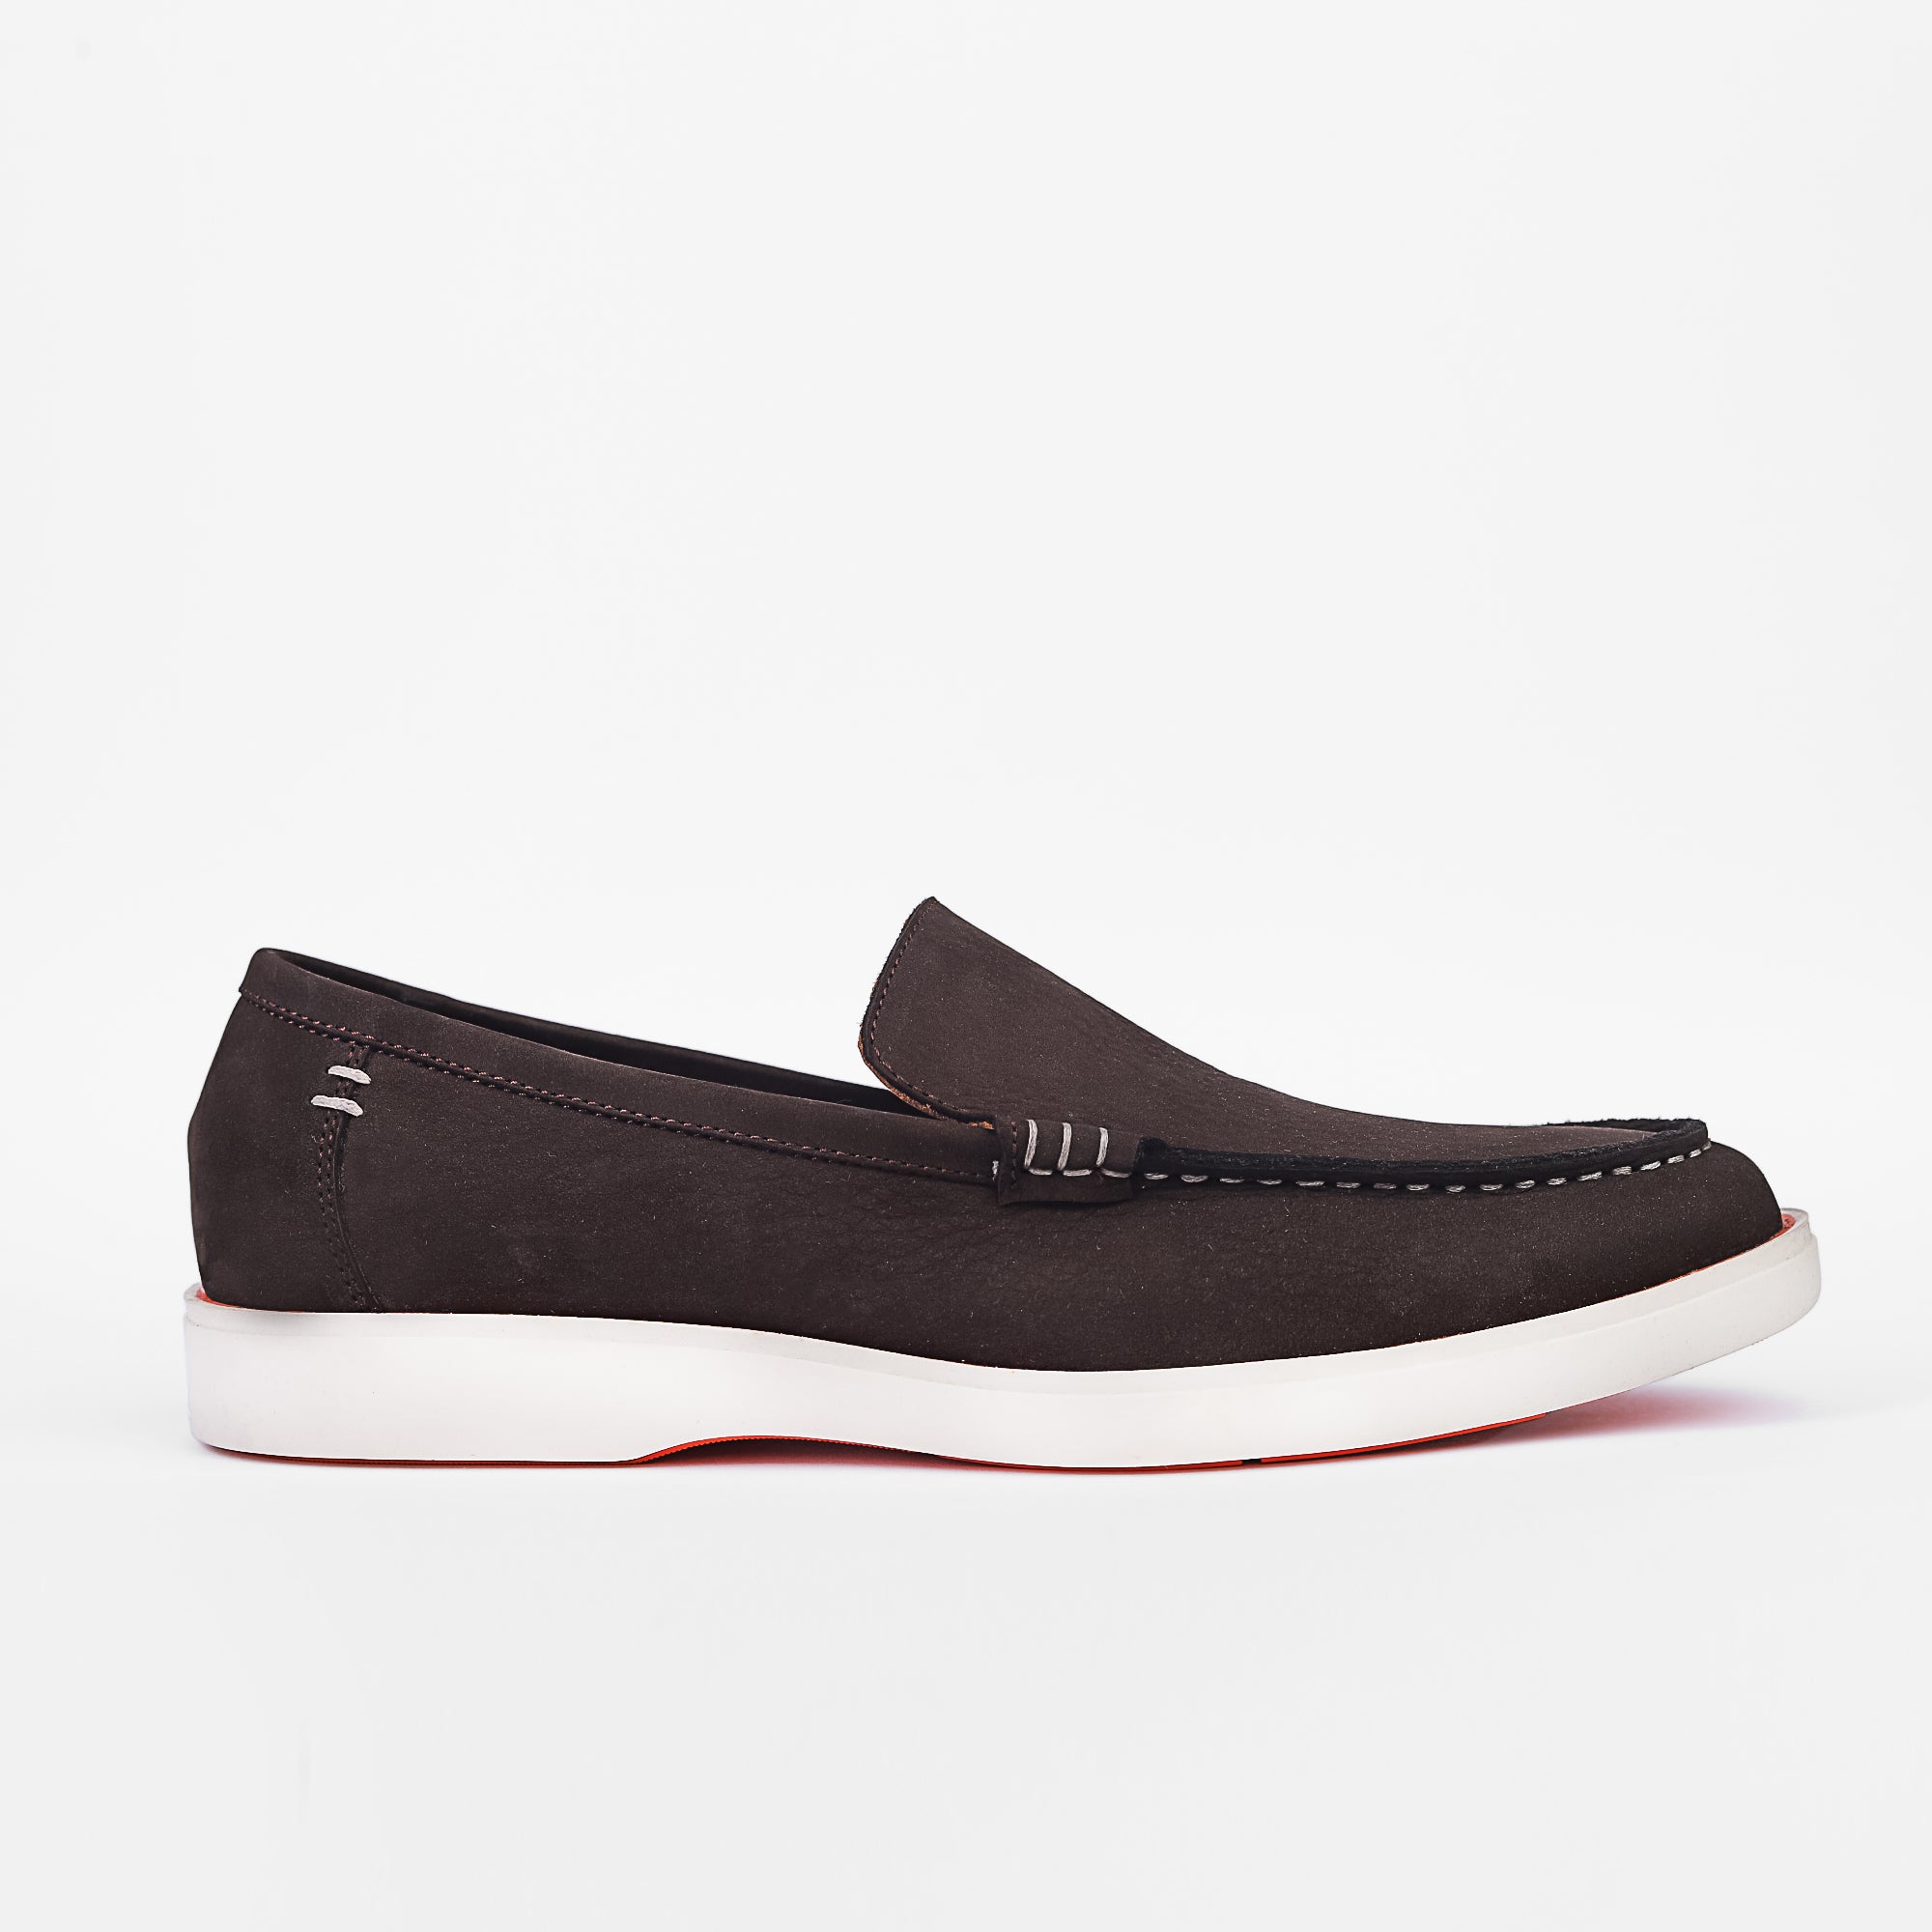 Lotfy Suede Flat Loafers For Men Brown